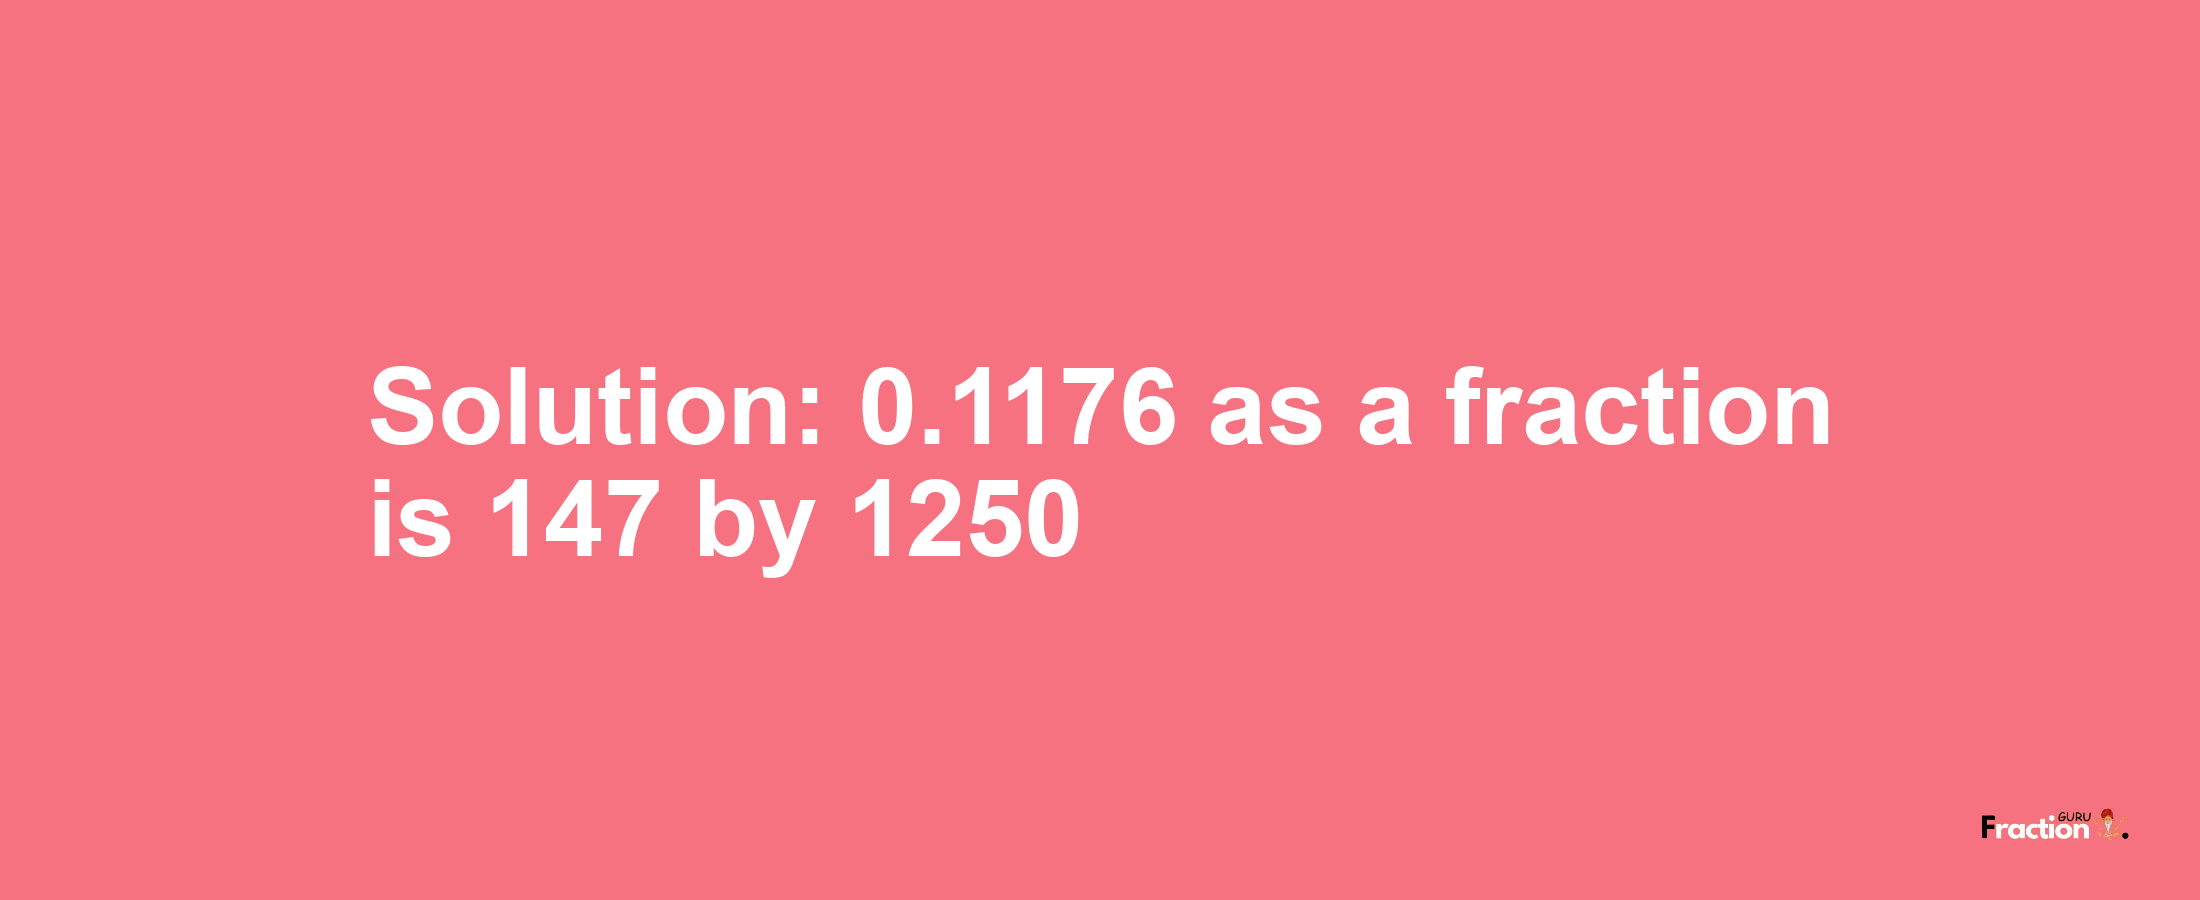 Solution:0.1176 as a fraction is 147/1250